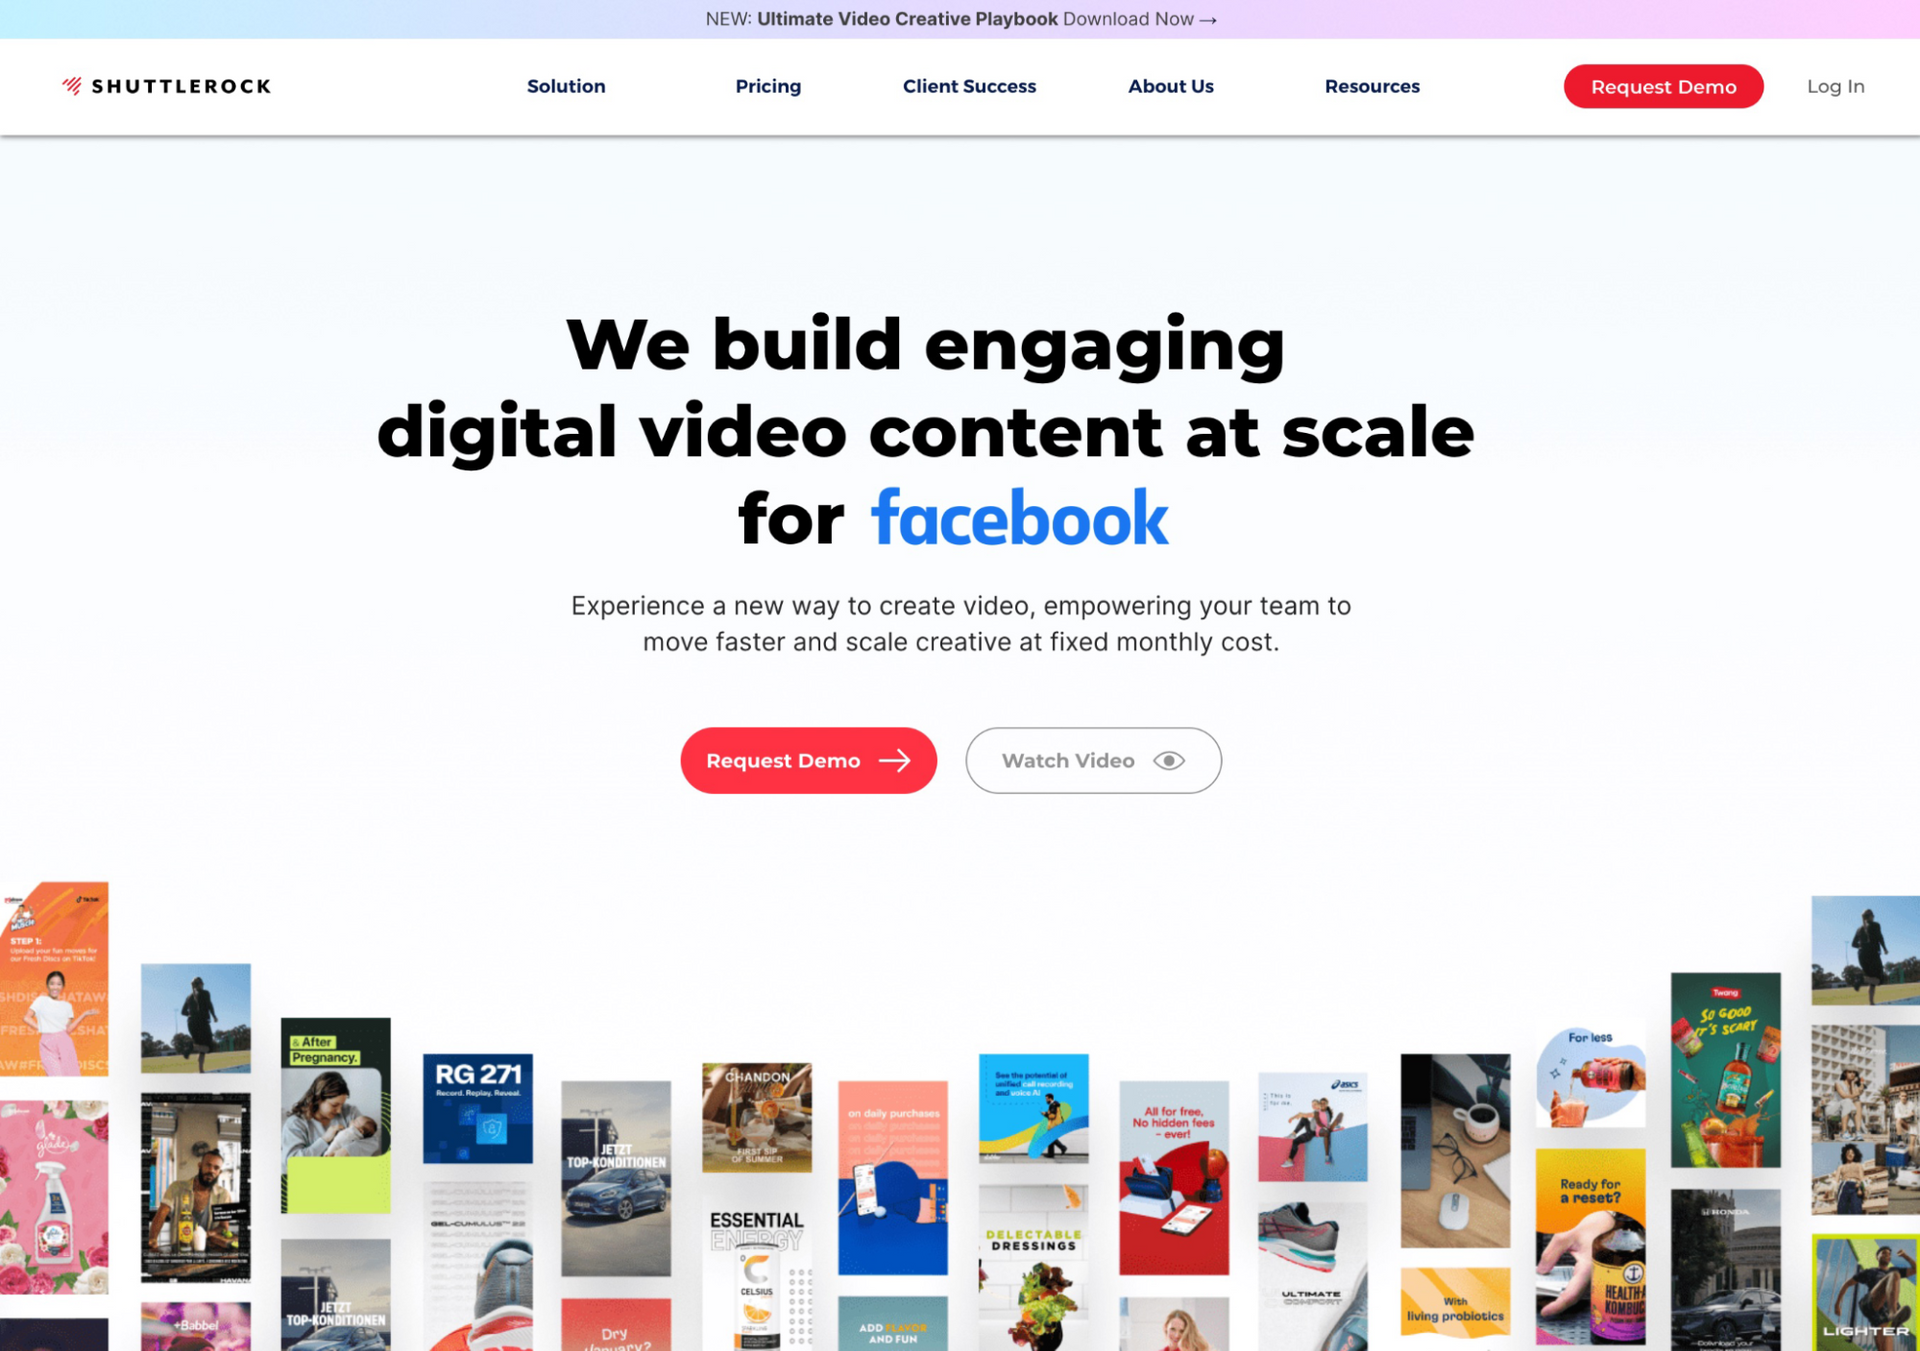 Shuttlerock: We build engaging digital video content at scale for Facebook